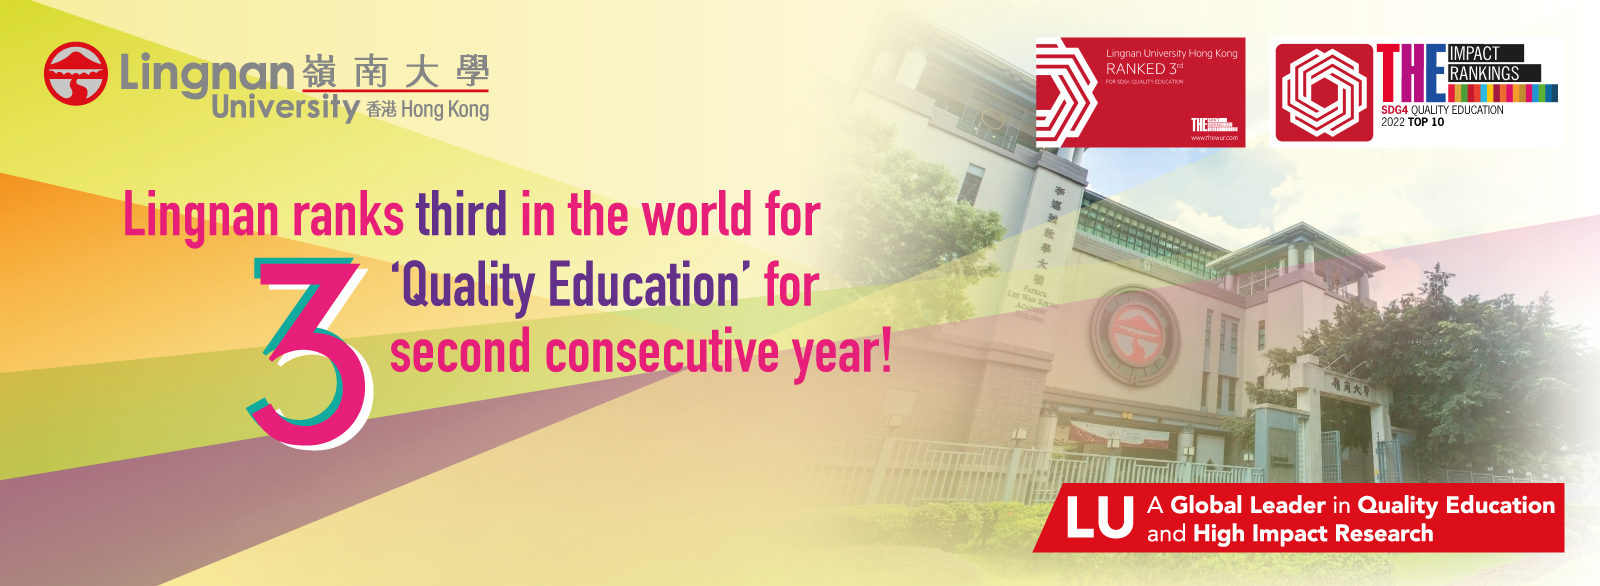 Lingnan ranks third in the world for Quality Education for second consecutive year!